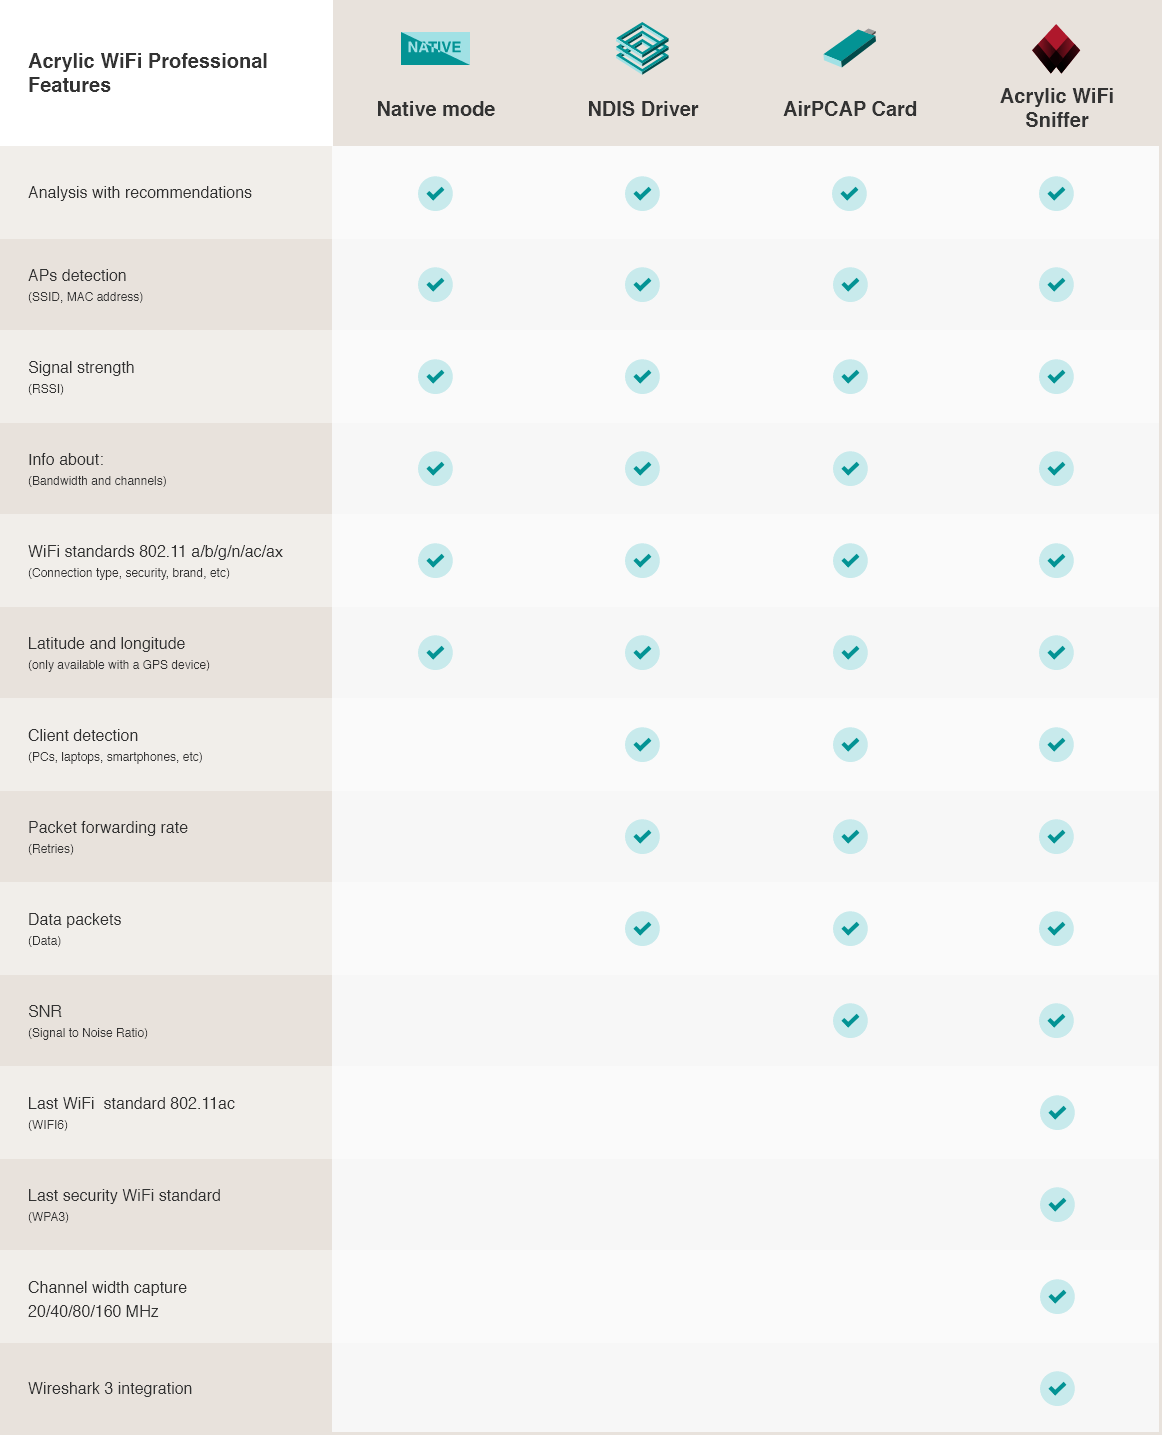 Acrylic Wi-Fi Professional feature comparison chart using Acrylic Wi-Fi Snffer, AirPcap cards, NDIS driver or native mode